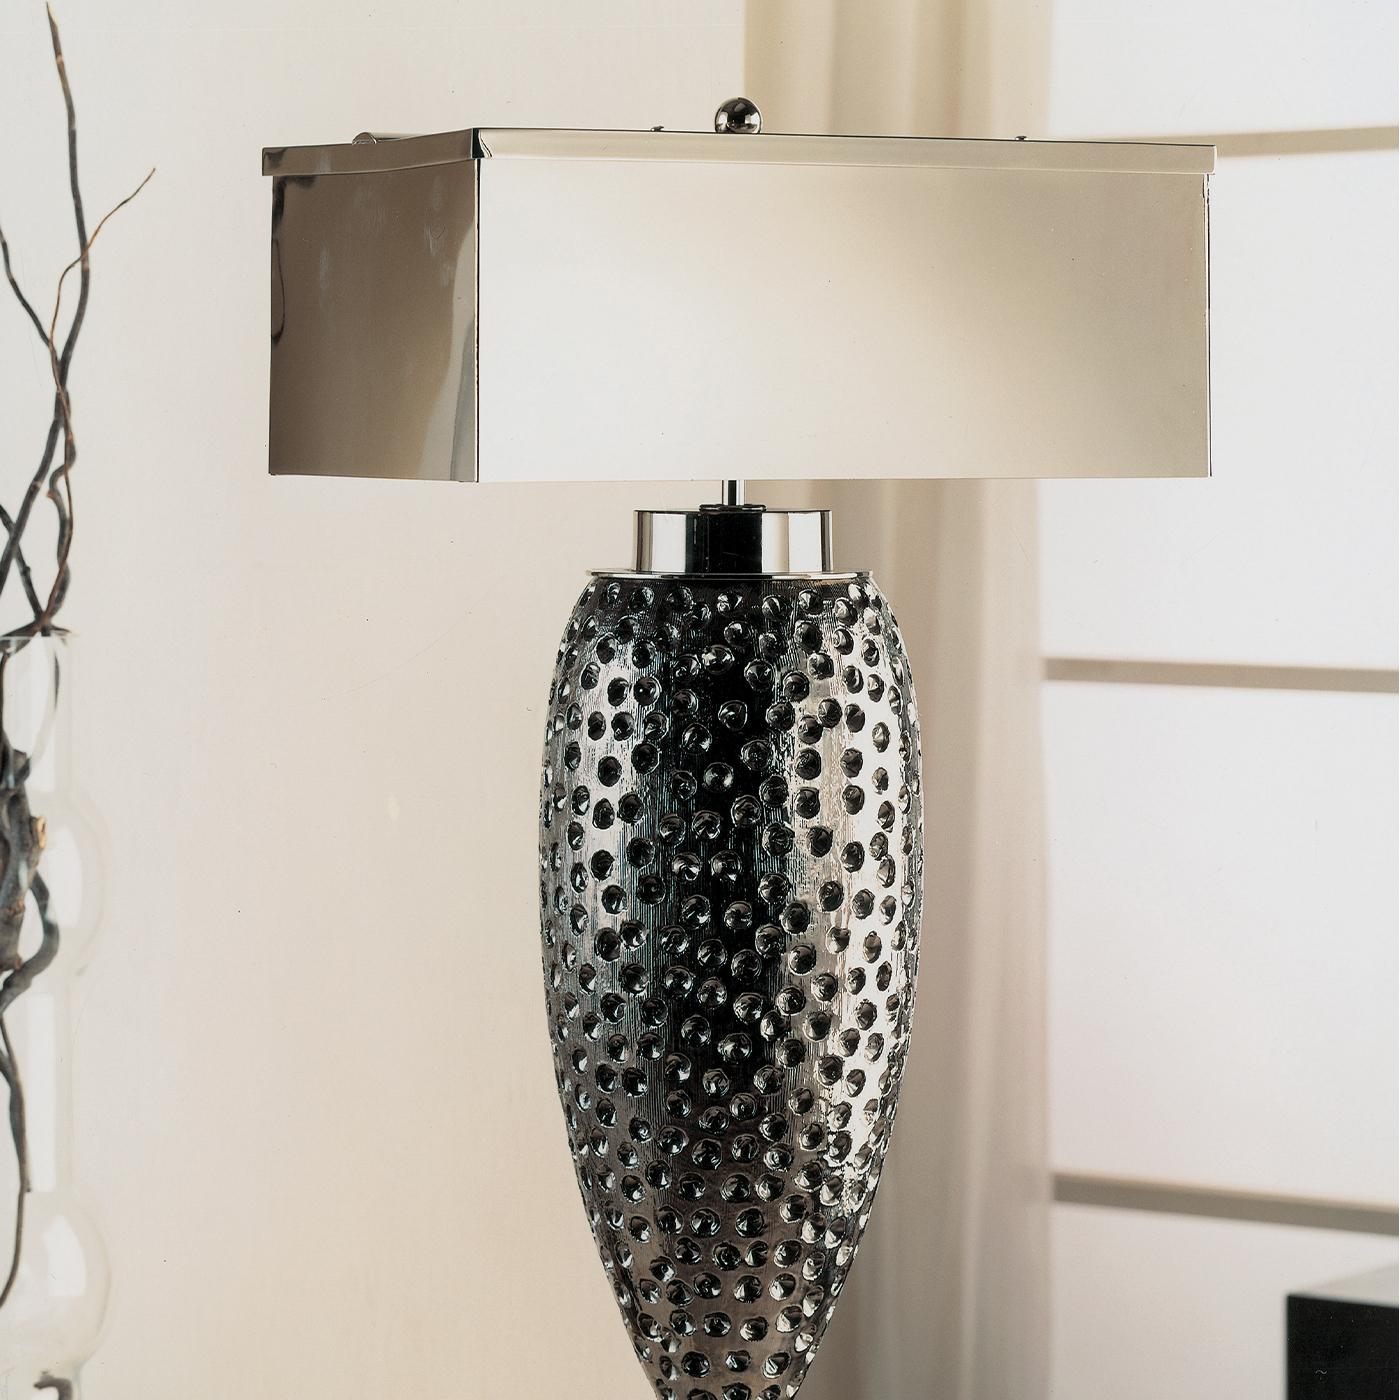 The hand-engraved and silver plated Majolica body of this table lamp gives off an almost sea-creature look with its mottled finish. The lamp has chrome brass detailing, rests on a black marble base, and has a chrome-plated, rectangular-shaped brass